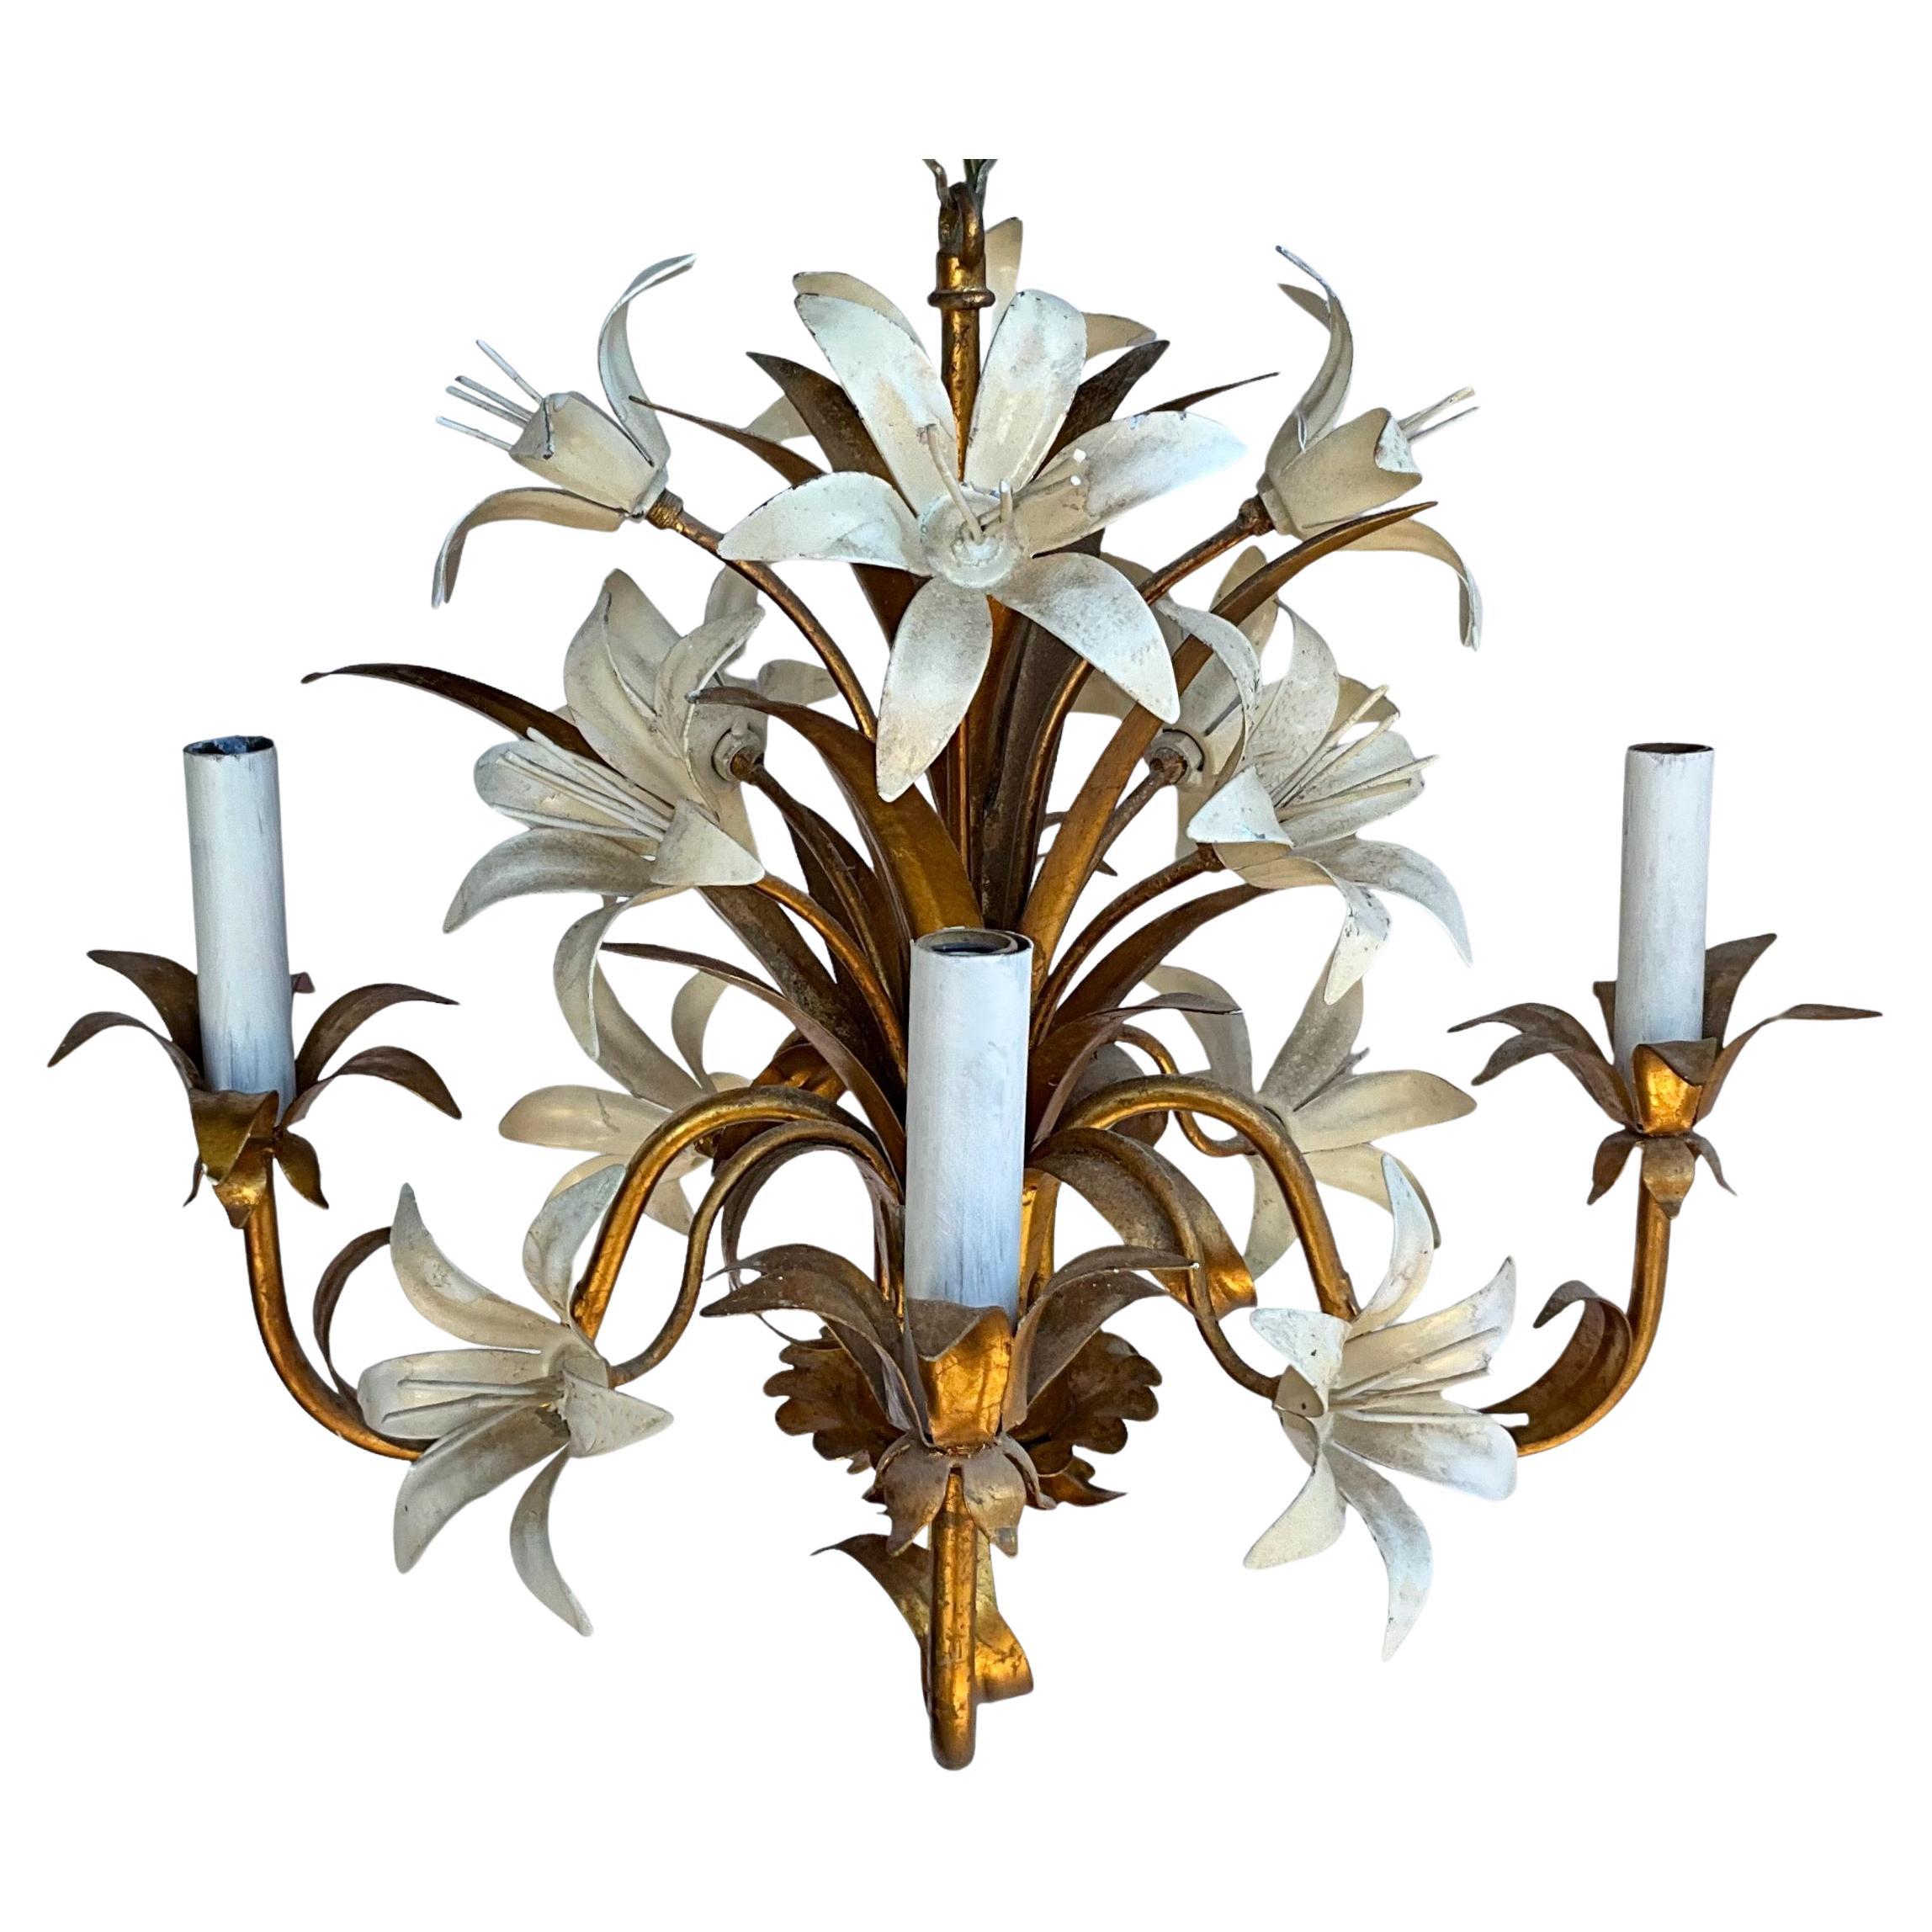 Mid-Century Hollywood Regency Italian Gilt Tole Chandelier With Lilies - 6 Arm For Sale